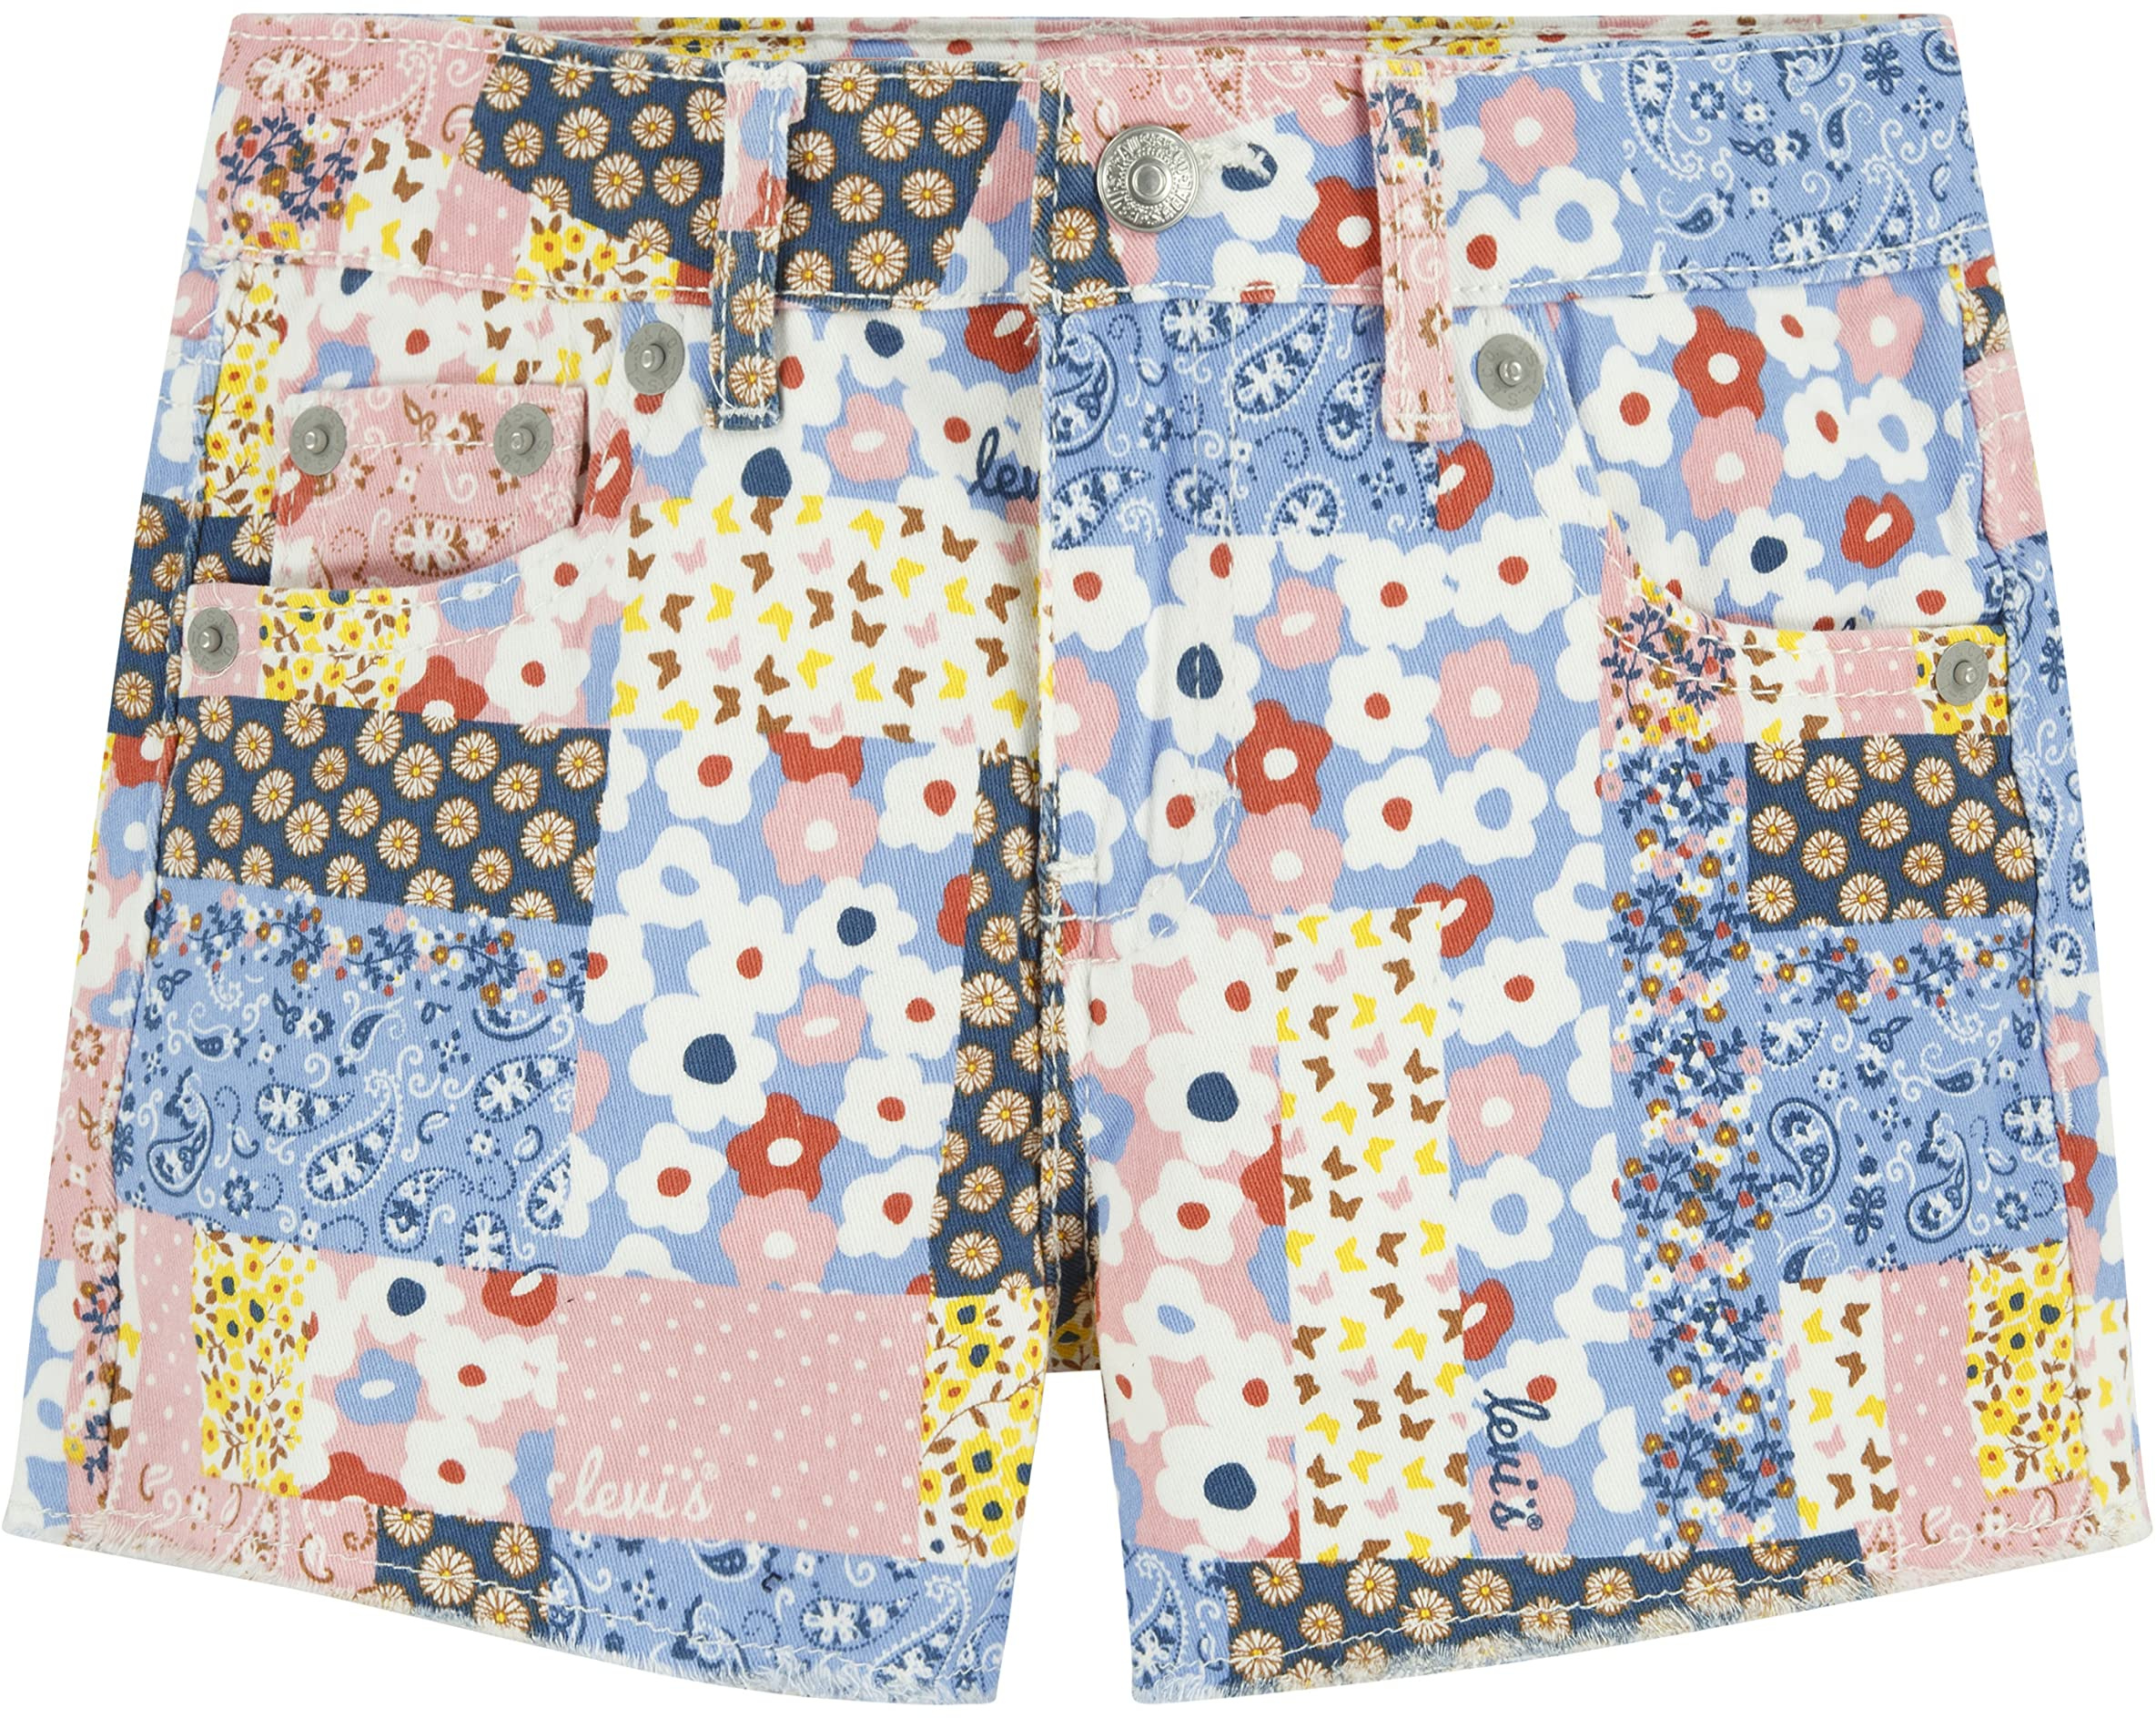 Girlfriend Fit Printed Shorty Shorts (Little Kids) Levi's®